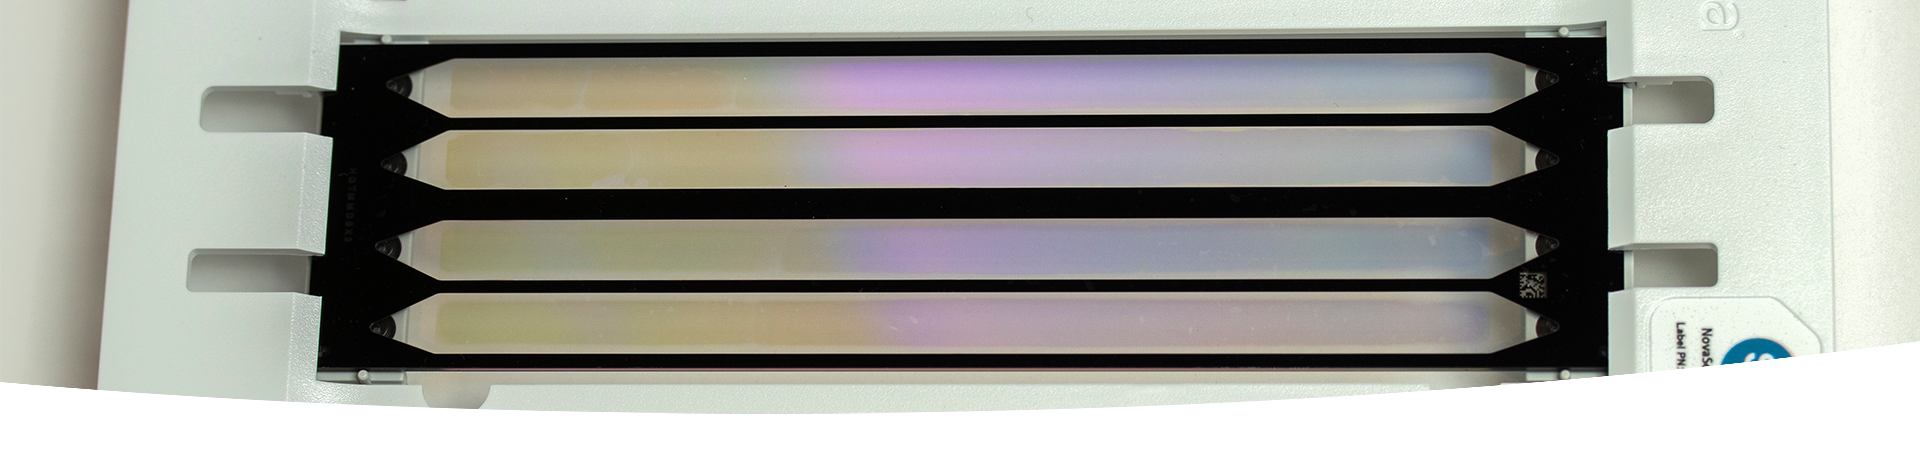 Patterned flow cell technology. A rectangular piece of equipment with tiny wells arranged in an array.